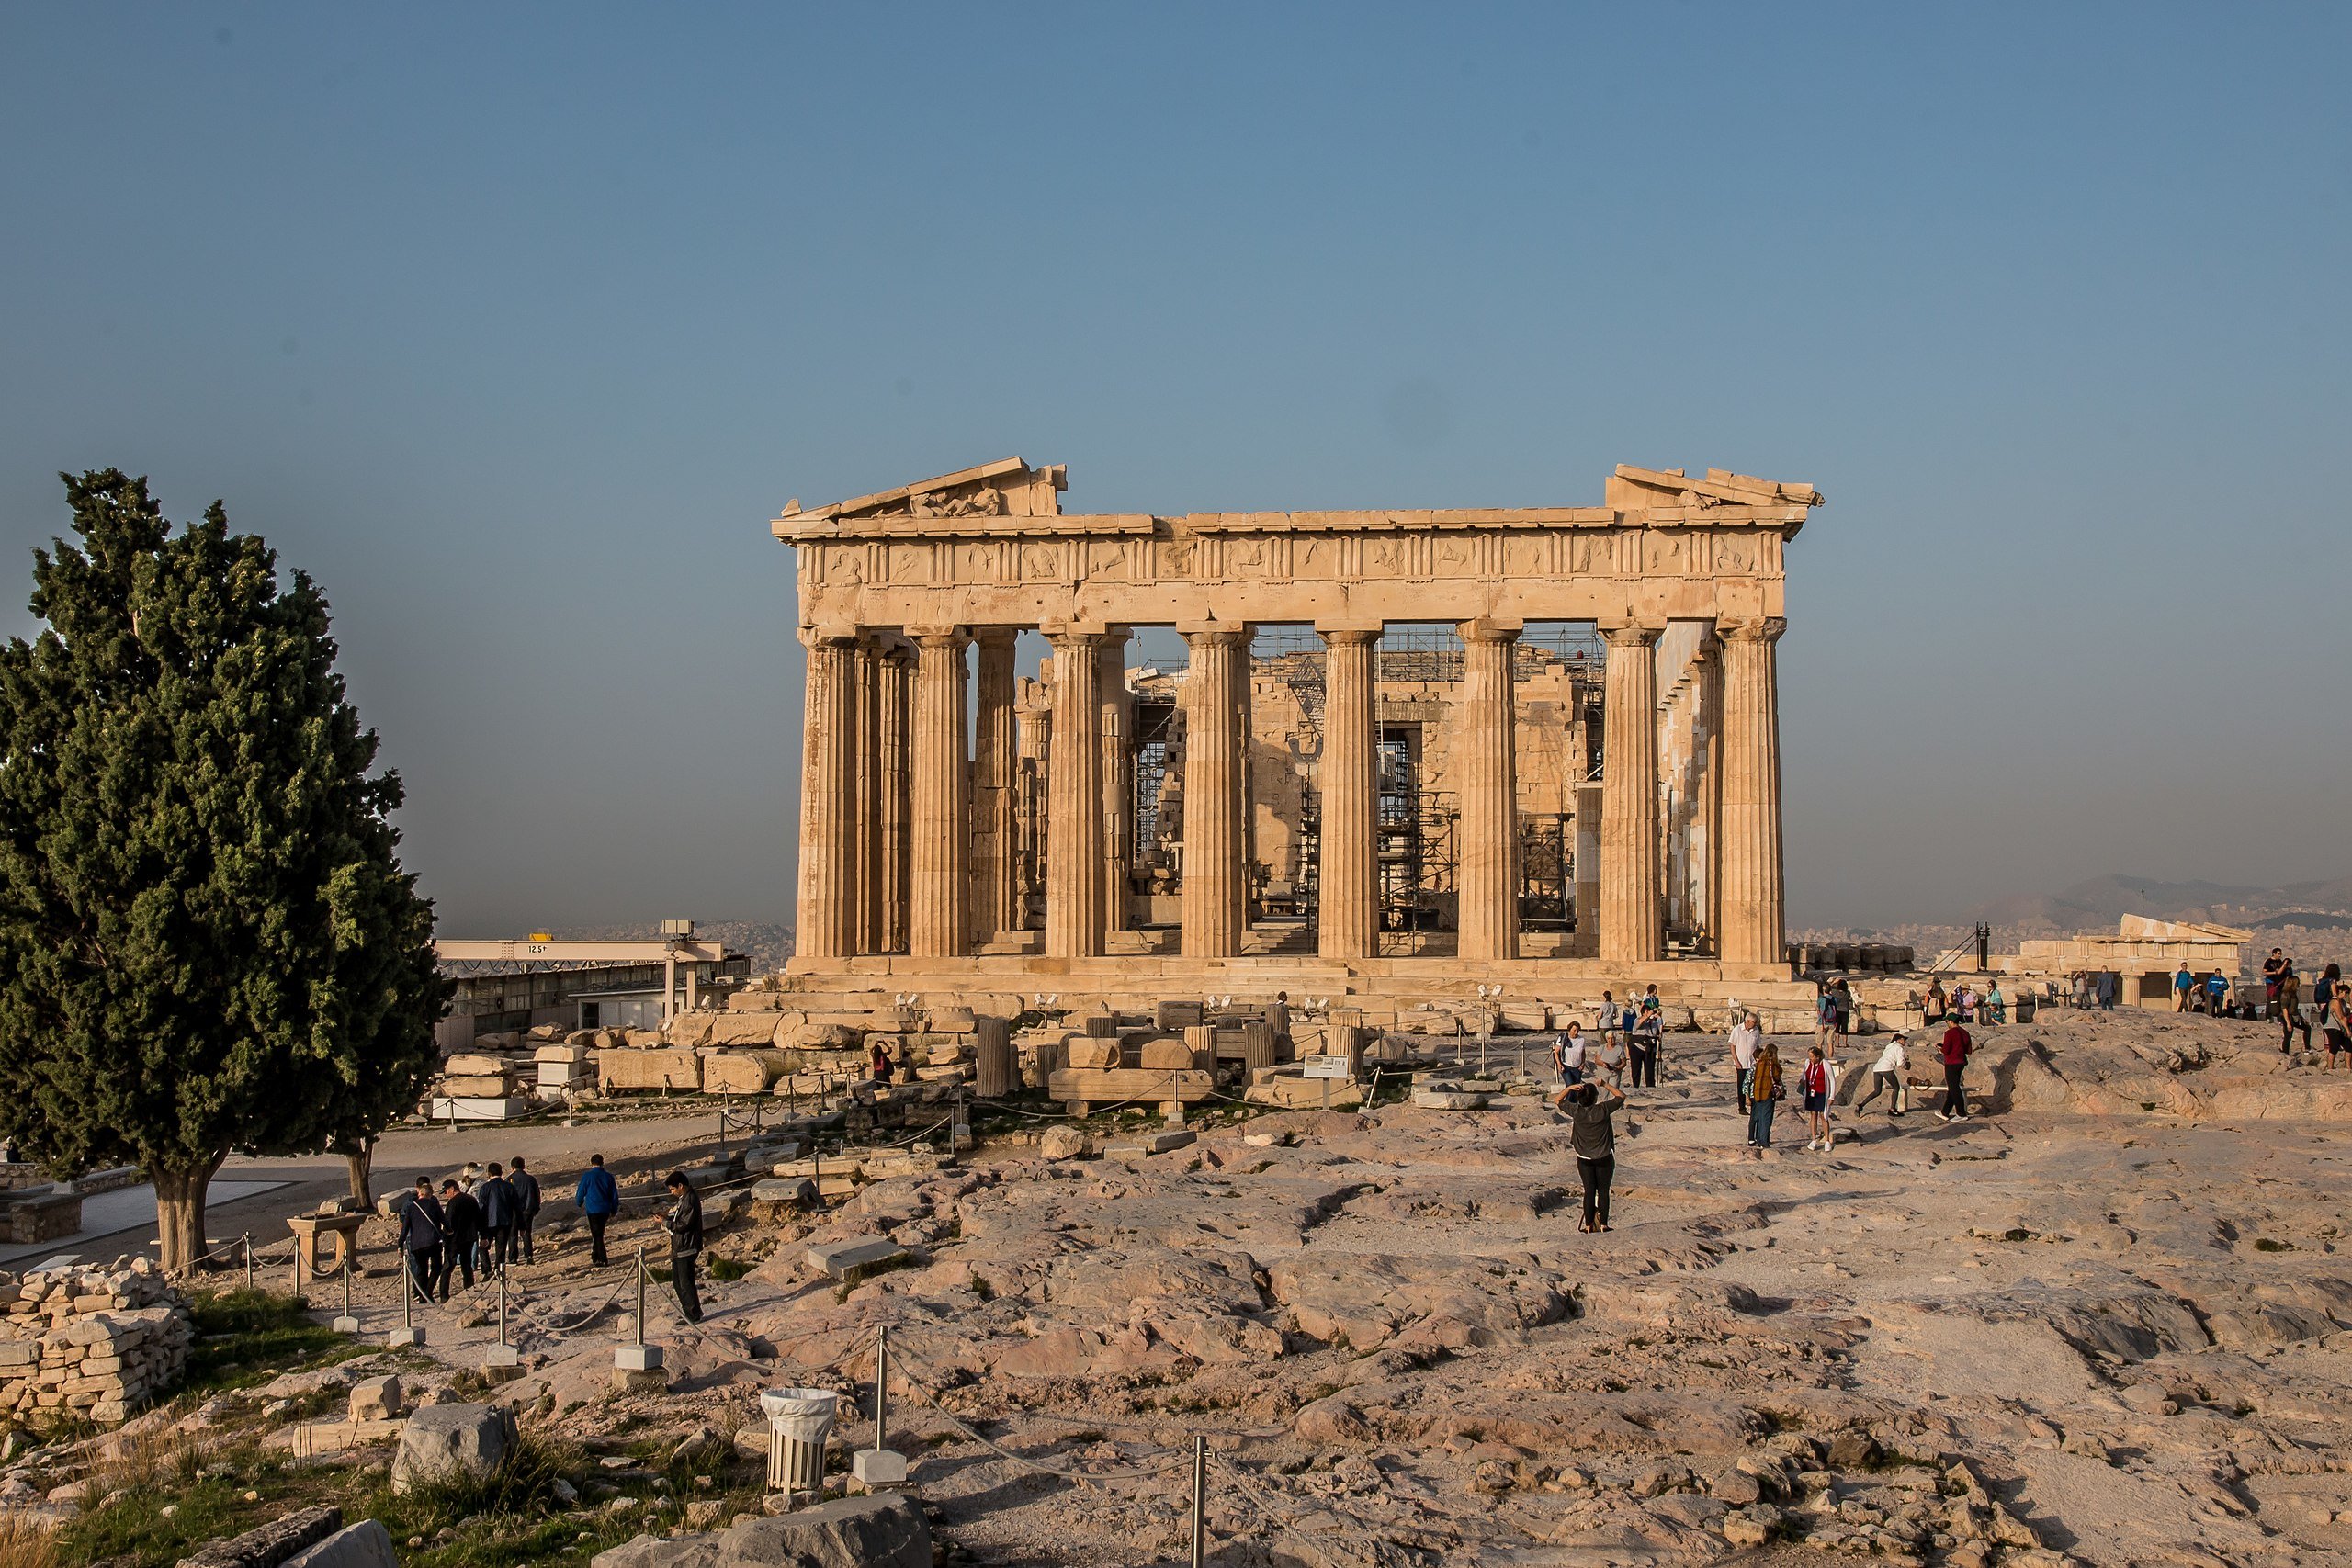 Greece has a long history of supporting the arts as an example the great Parthenon of athens